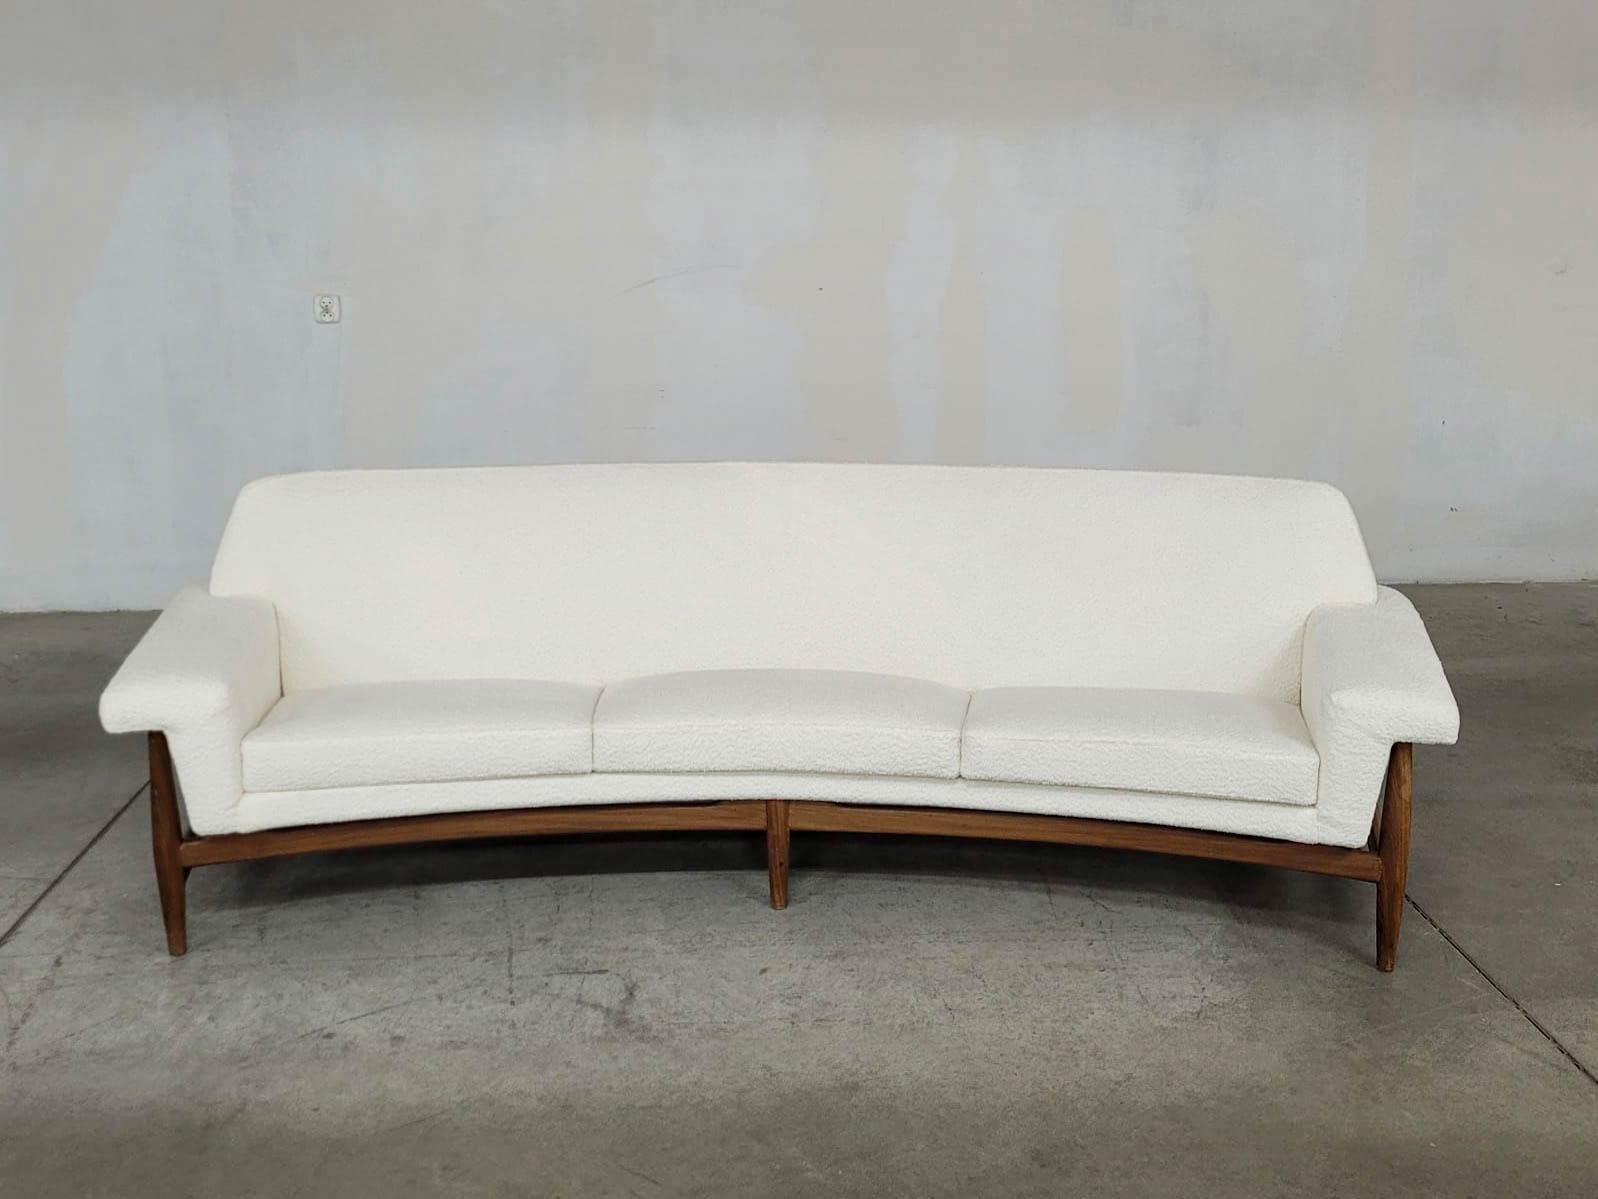 The Johannes Andersen-designed sofa, manufactured by AB Trensums Fåtöljfabrik from the 1950s to the 1970s. Crafted from teak and upholstered in a classic bouclette white fabric, this vintage piece boasts a fusion of timeless elegance and